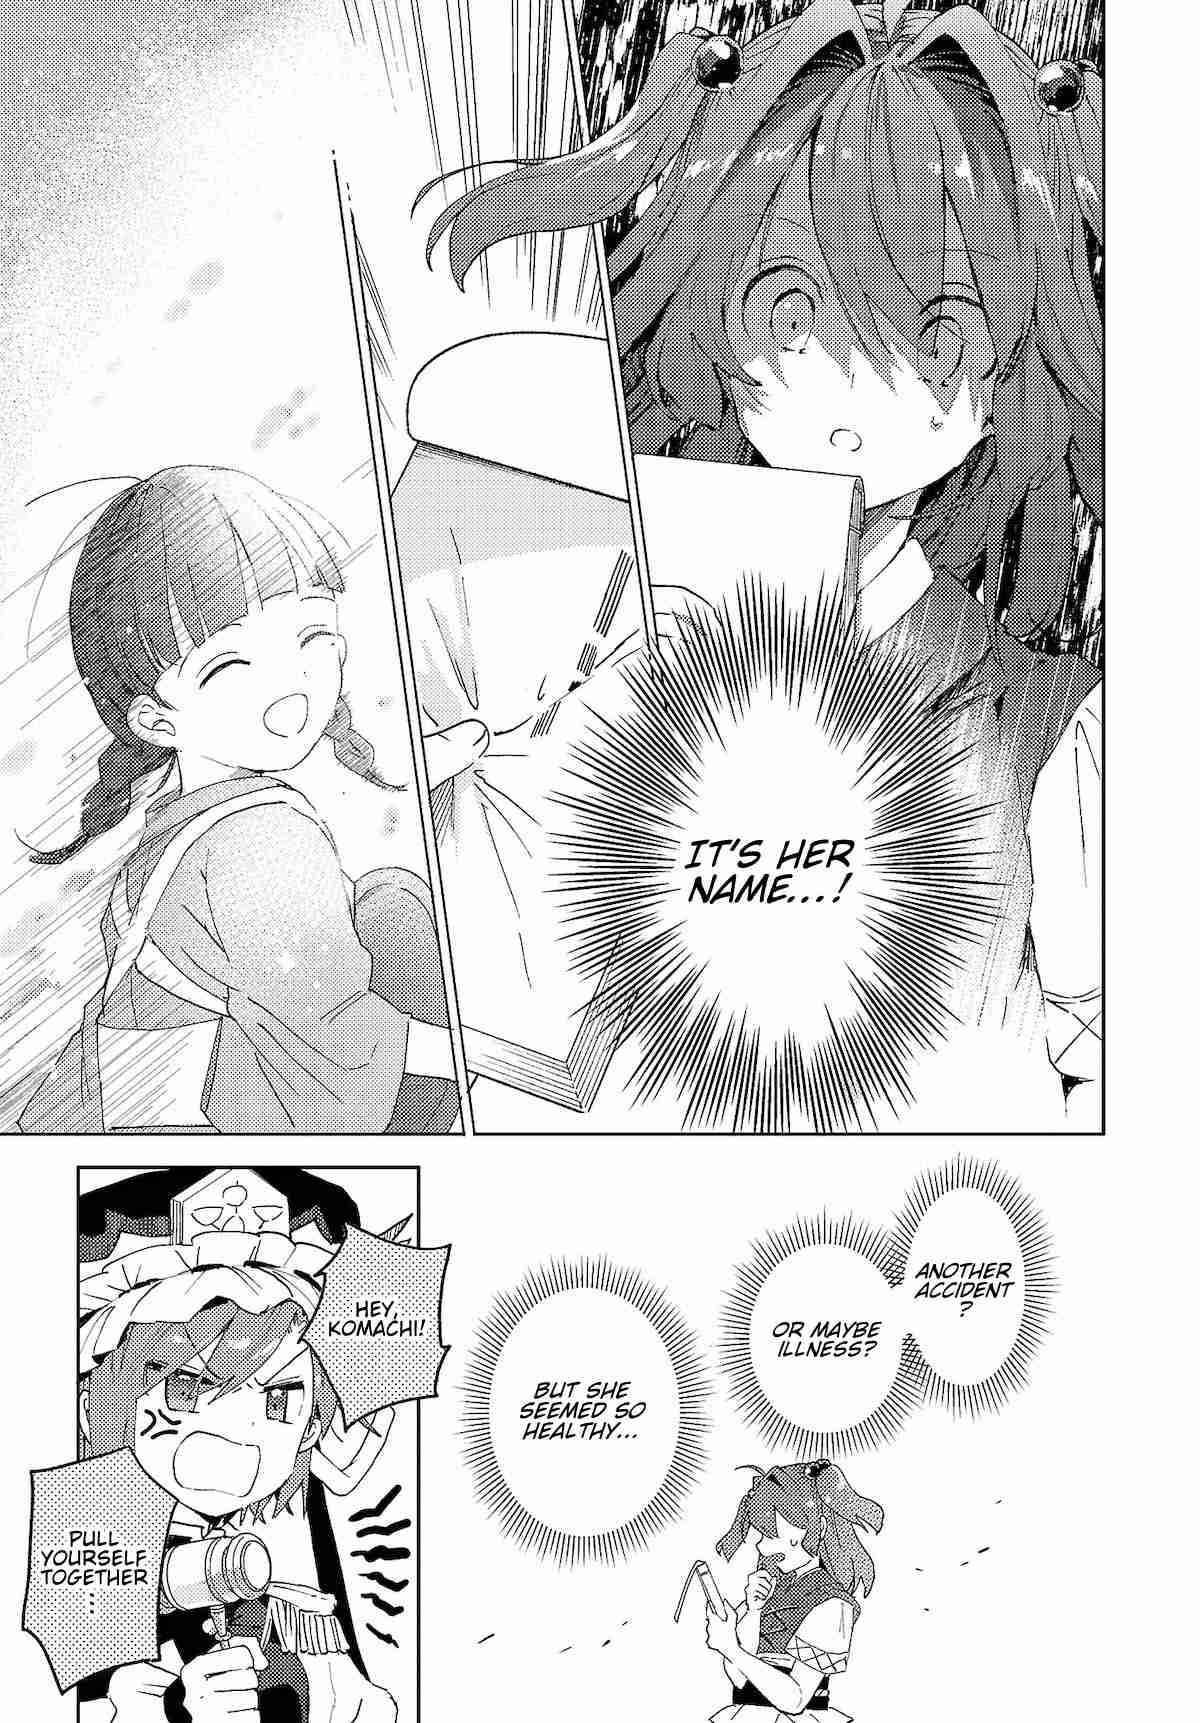 Touhou ~ The Shinigami's Rowing Her Boat as Usual Ch. 5